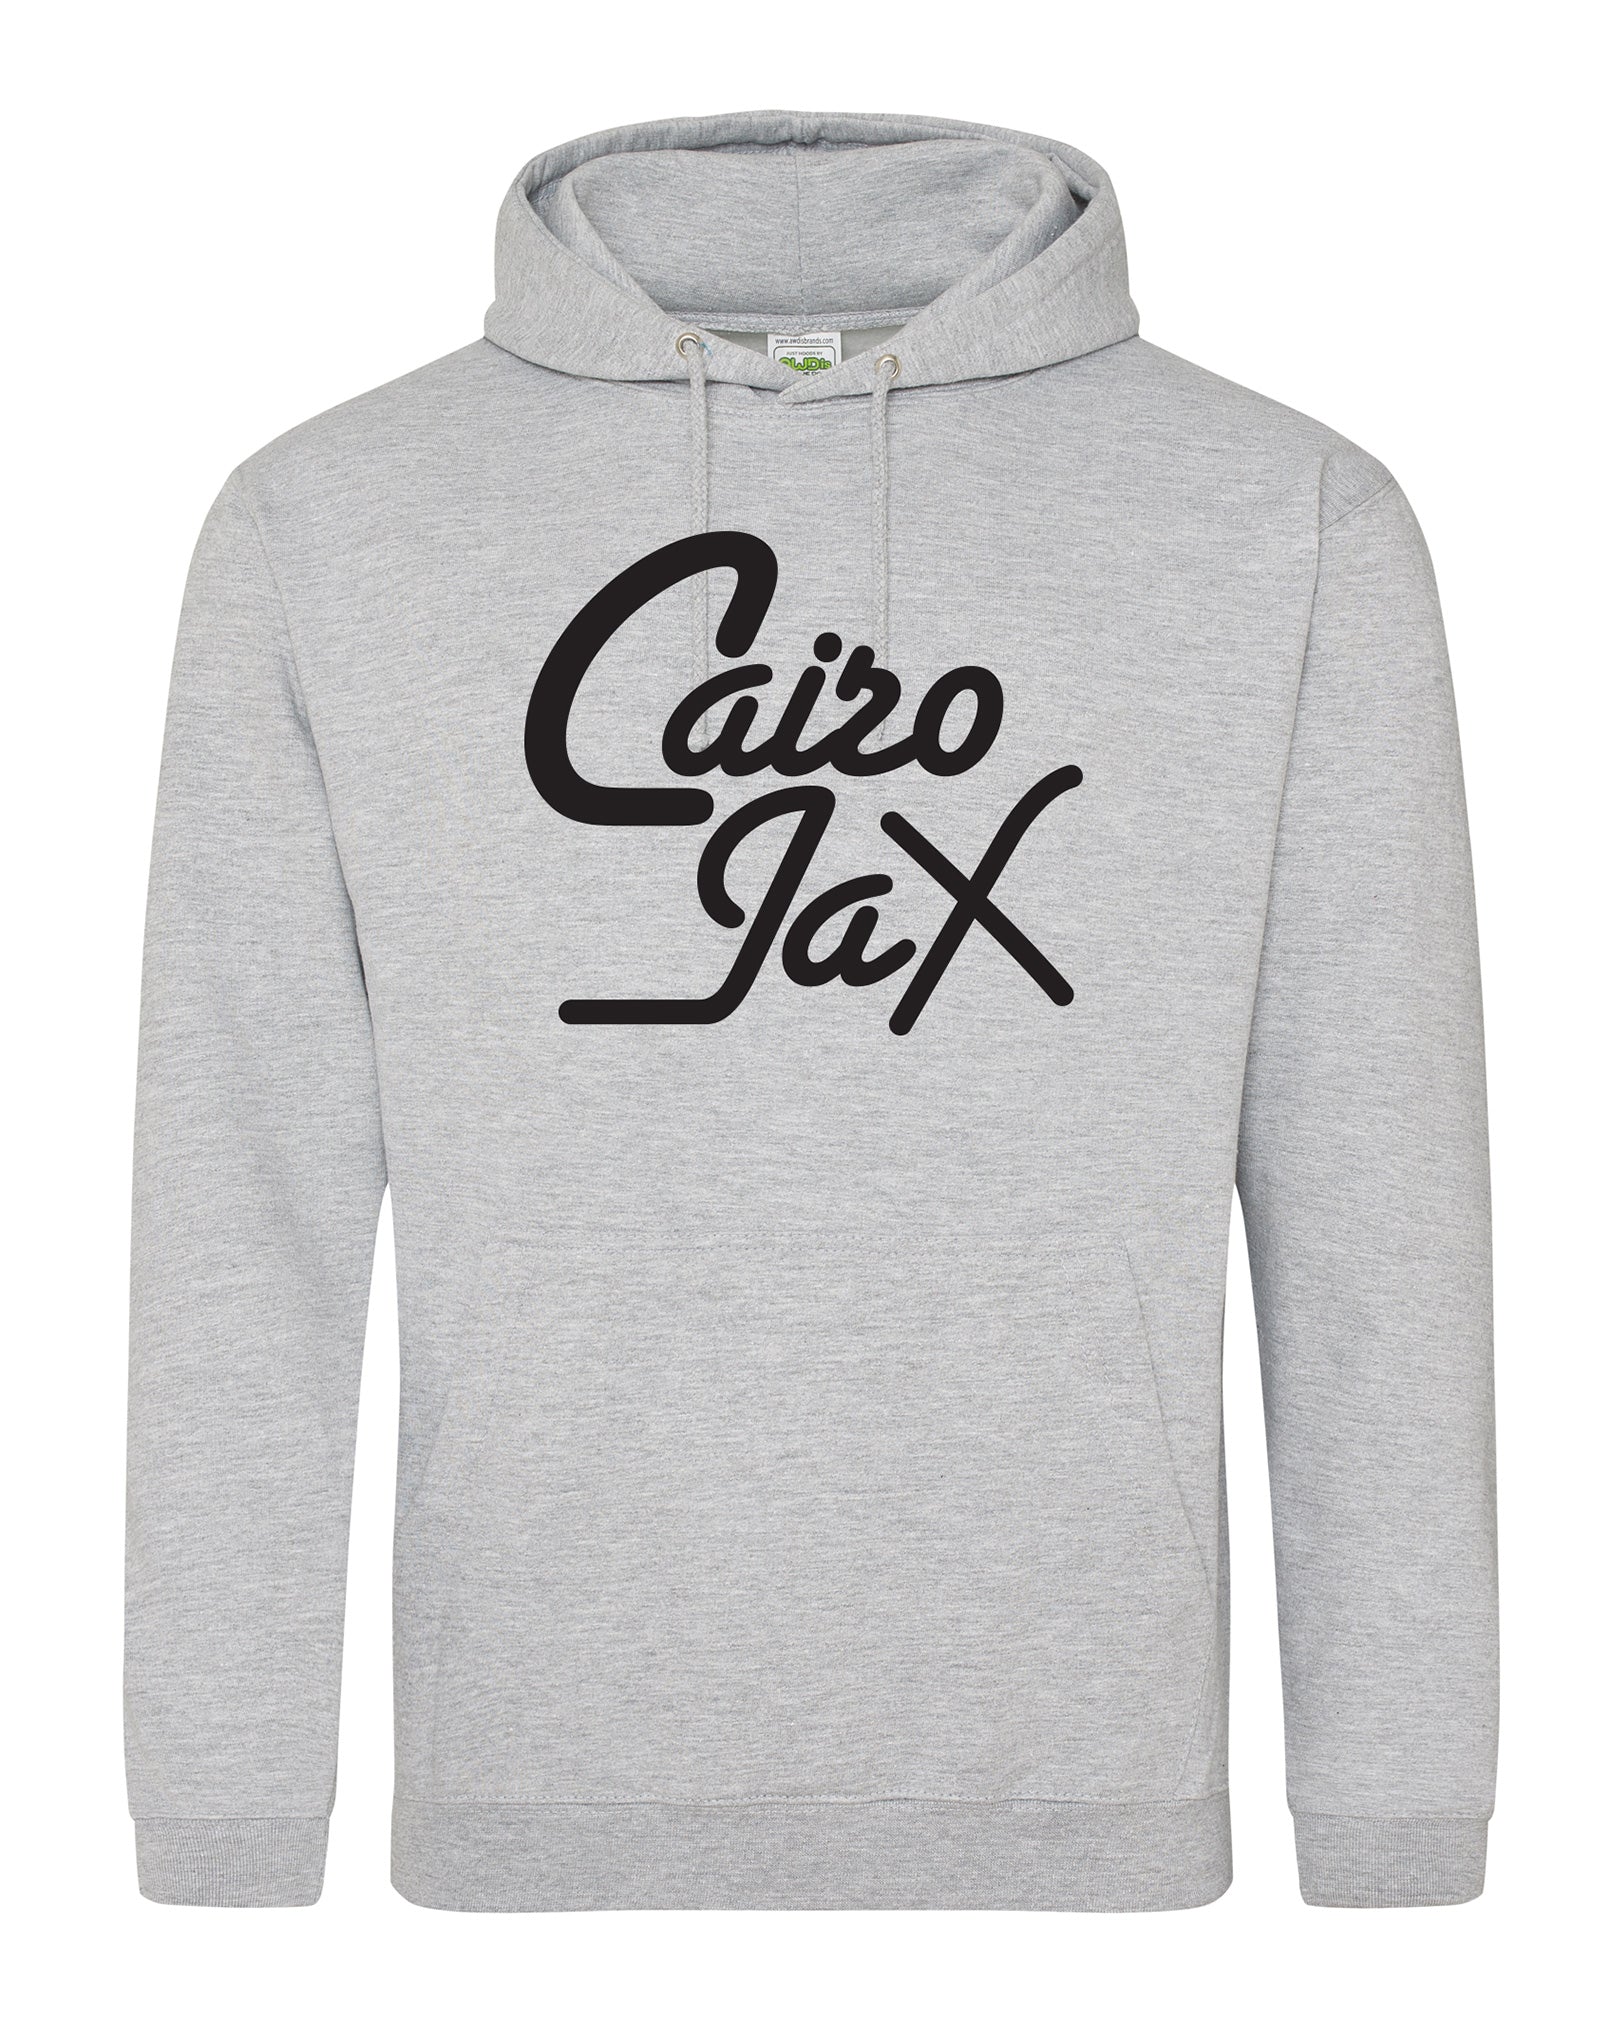 Cairo Jax unisex fit hoodie - various colours - Dirty Stop Outs